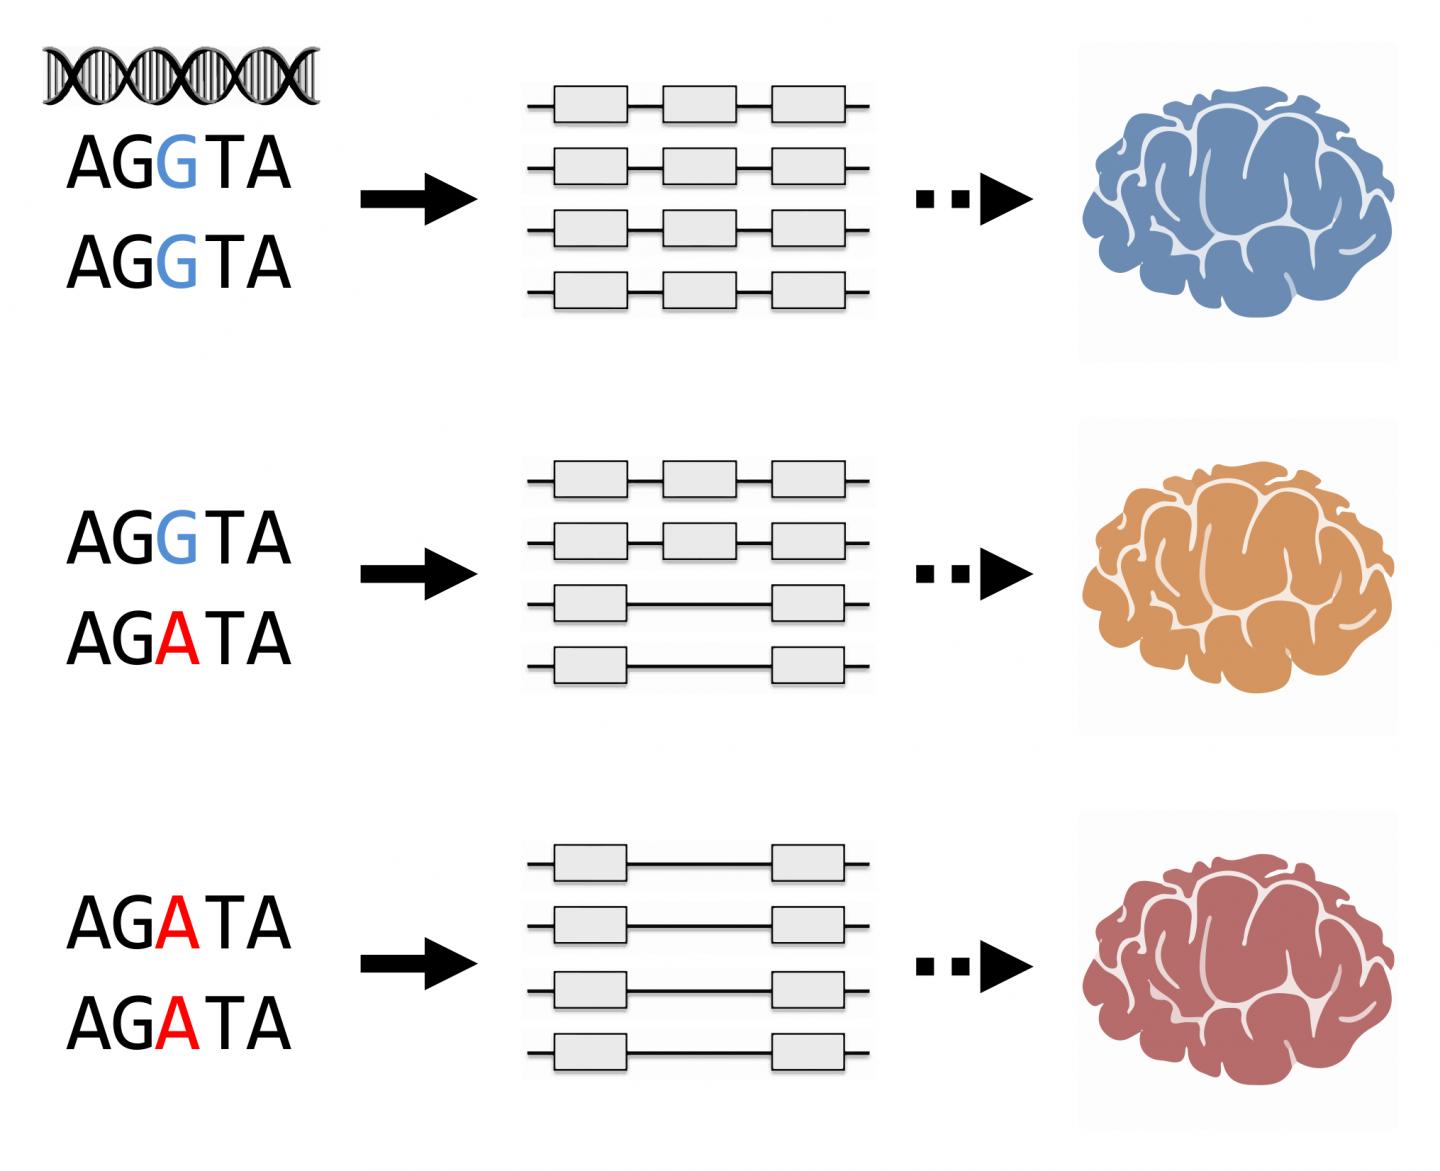 Researchers identify genetic variants controlling alternative splicing of transcribed RNA in the human brain, which may be associated with brain phenotypes such as mental disorders. [RIKEN]